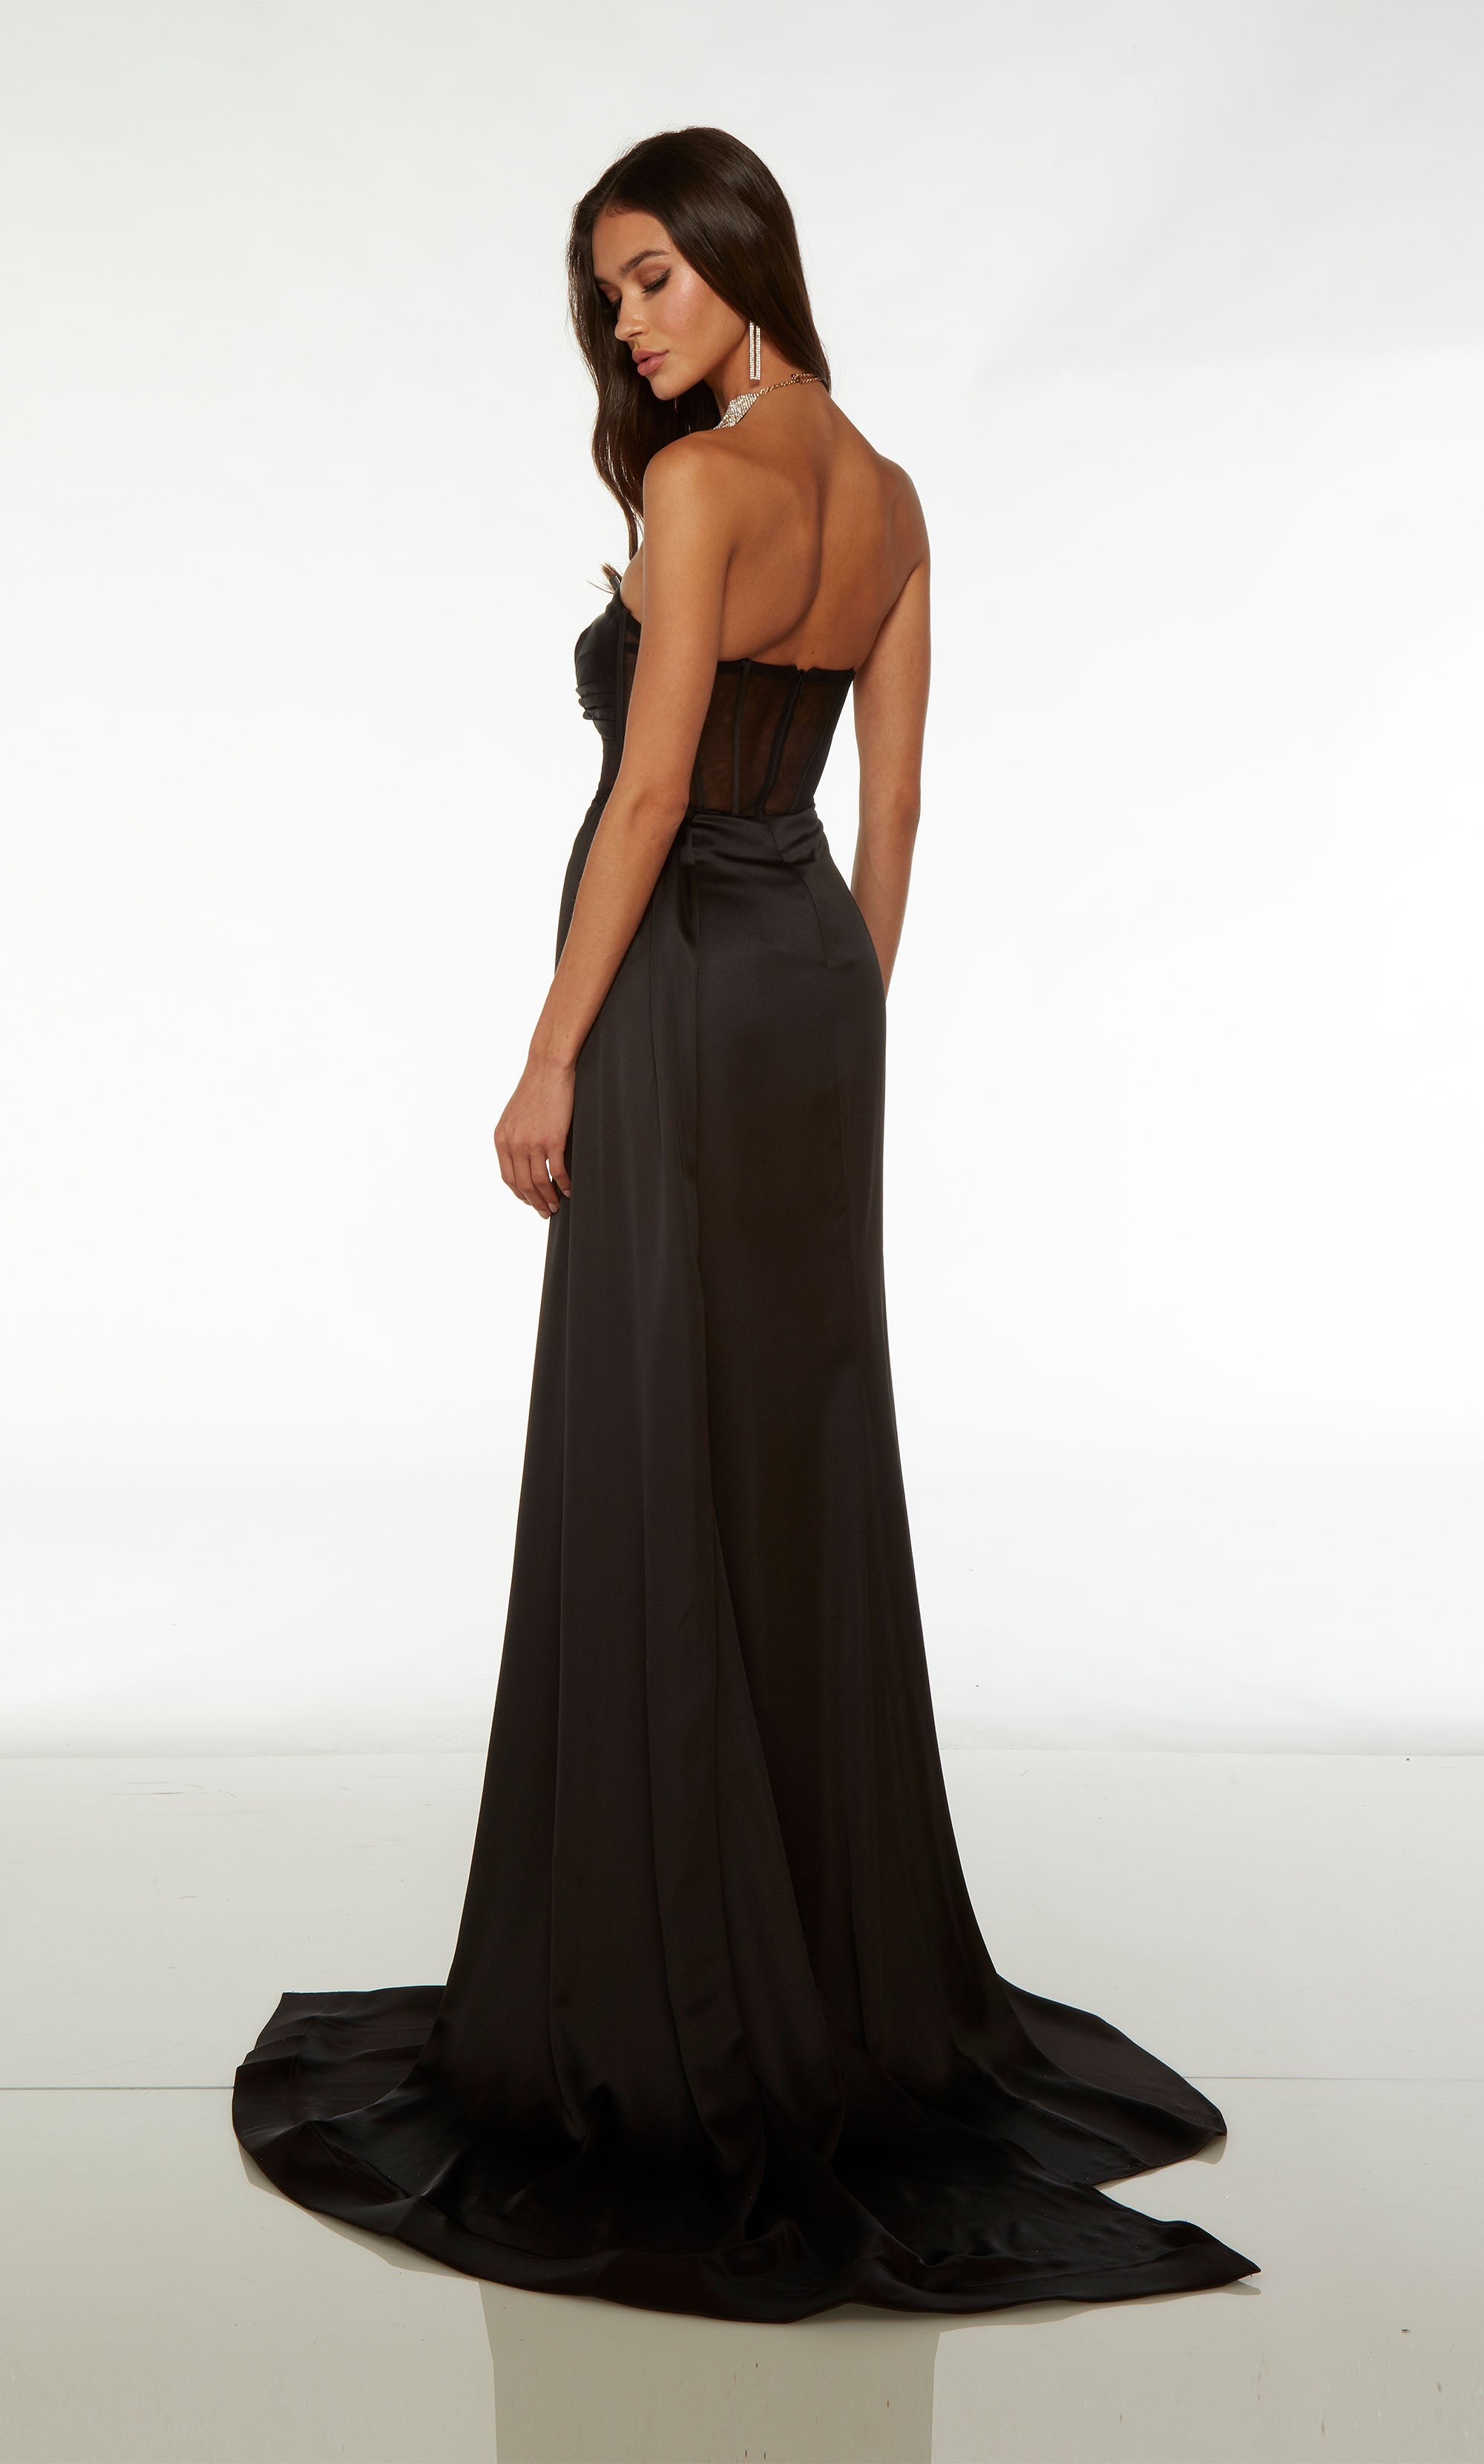 Edgy black prom dress with strapless neckline, sheer corset bodice, high side slit, train, and an detachable side train for added dramatic effect.